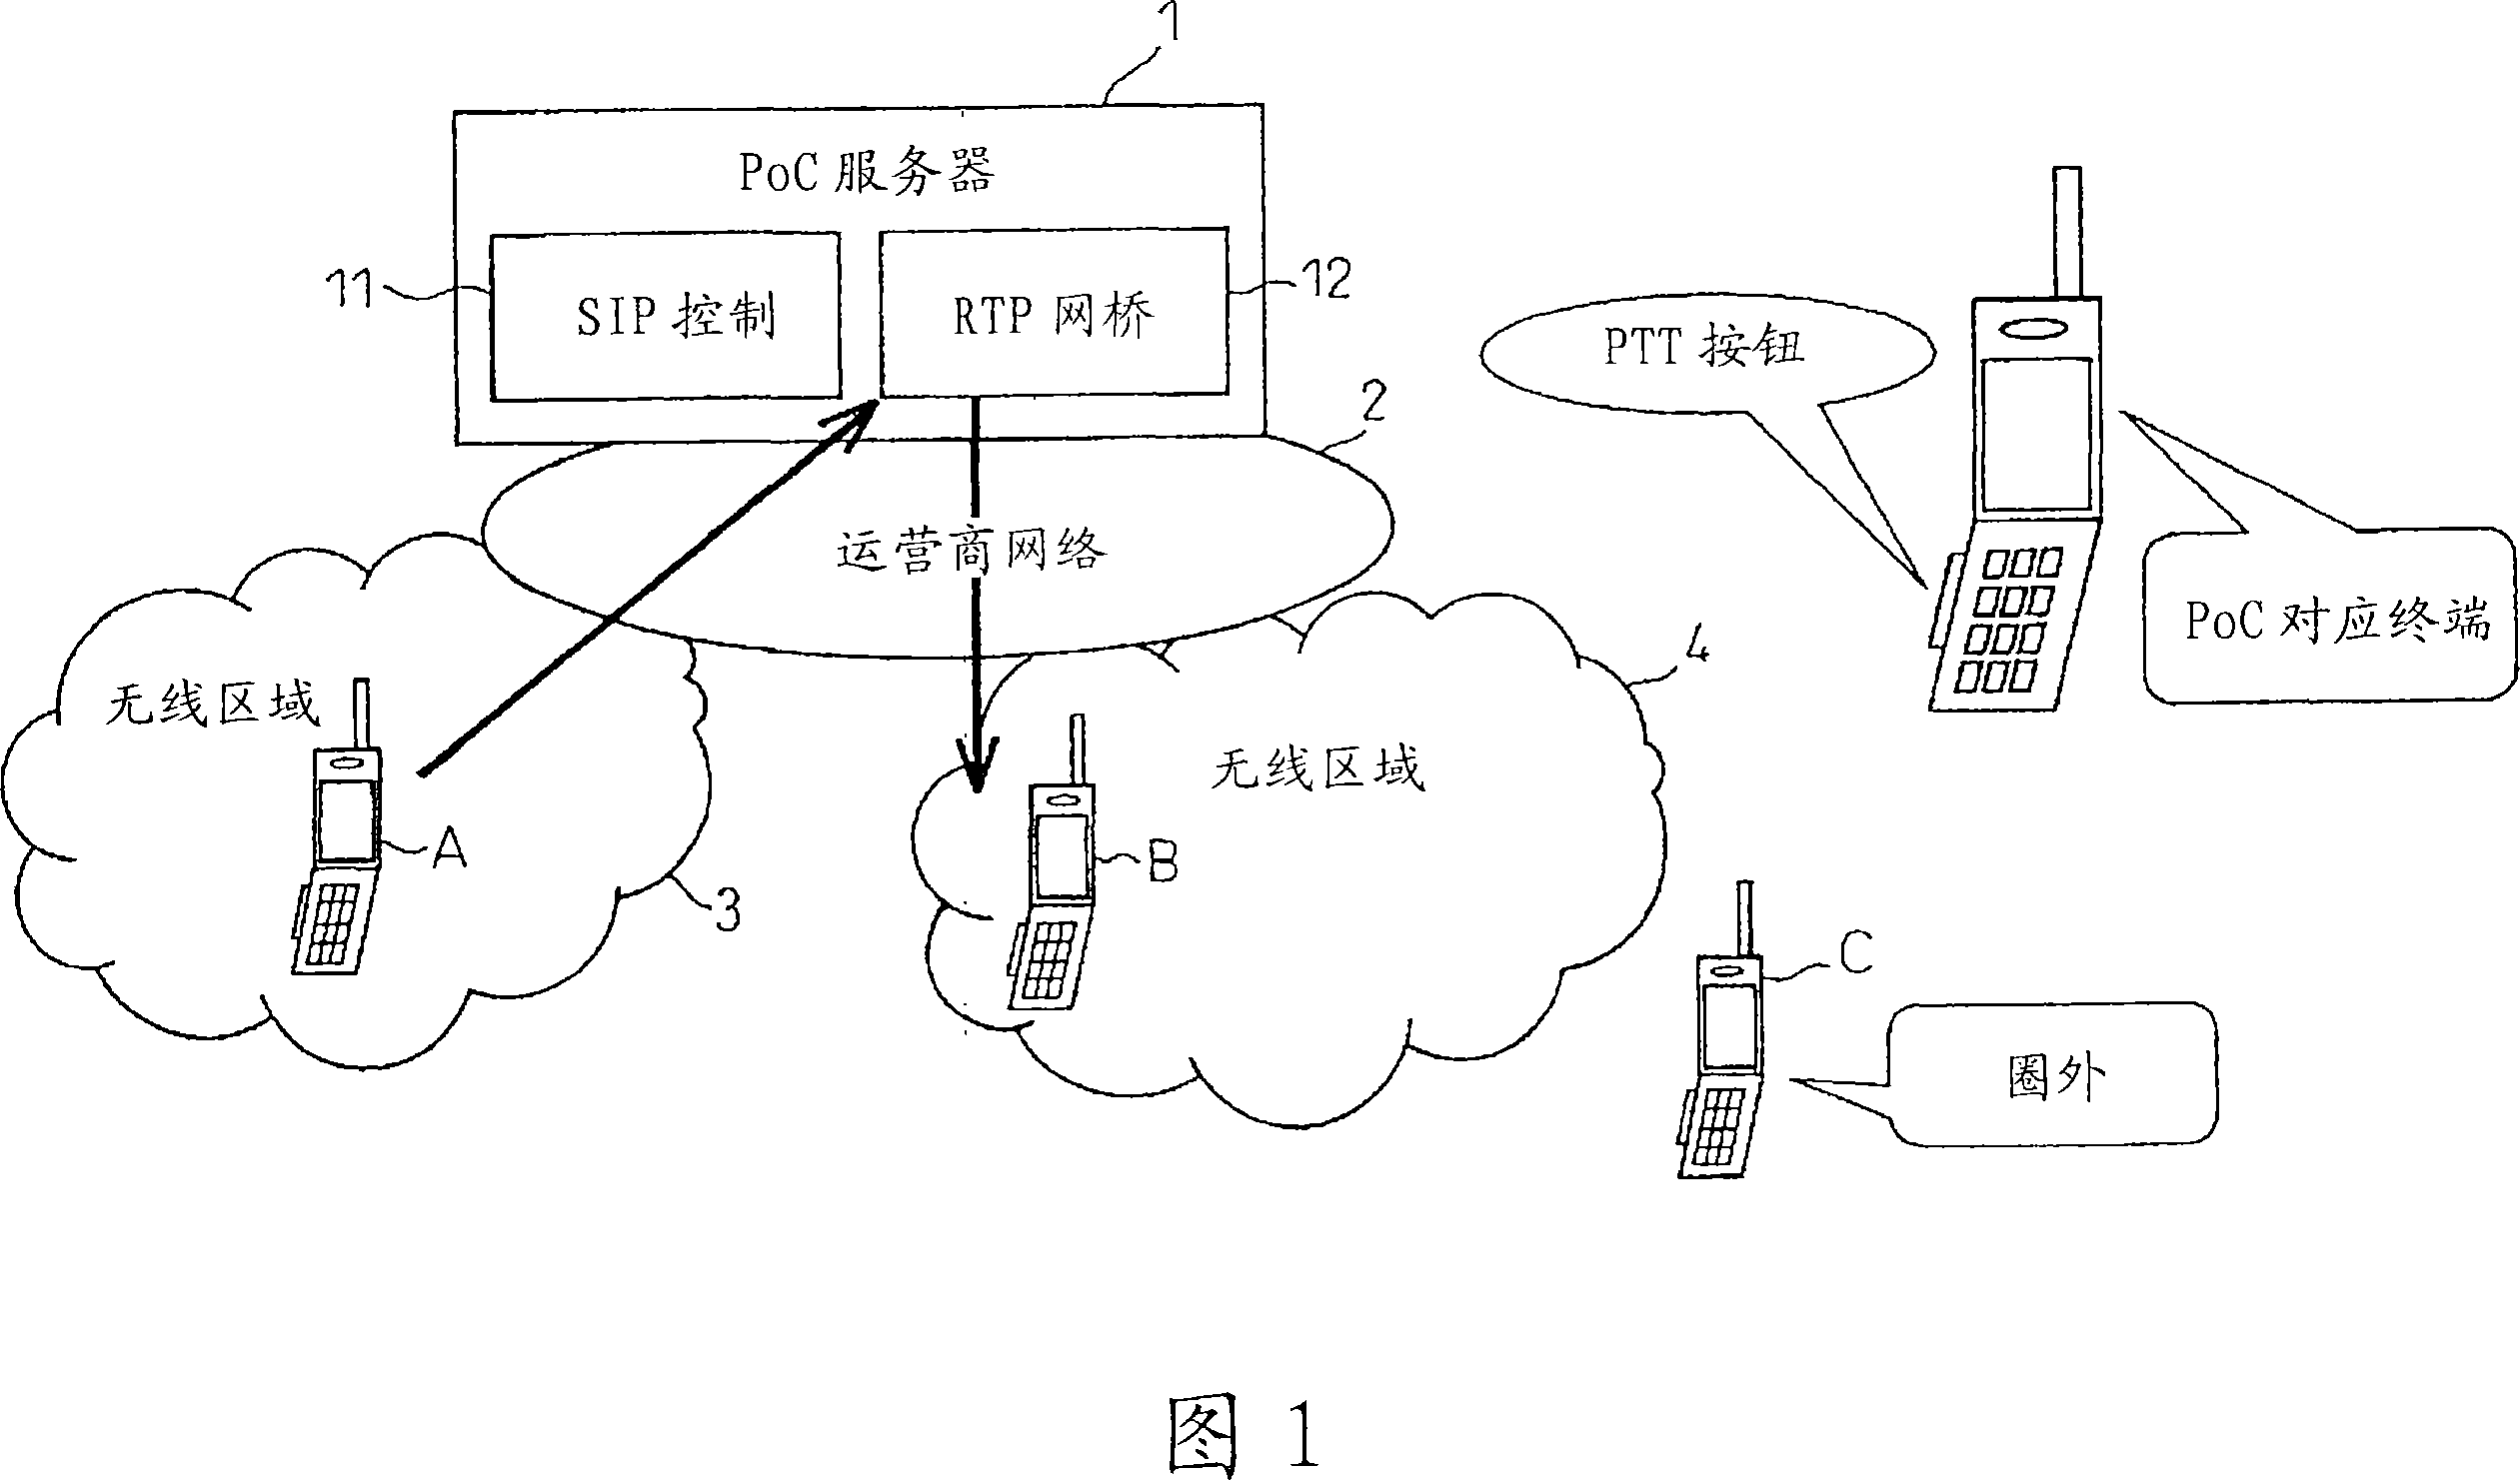 Content server and content service system